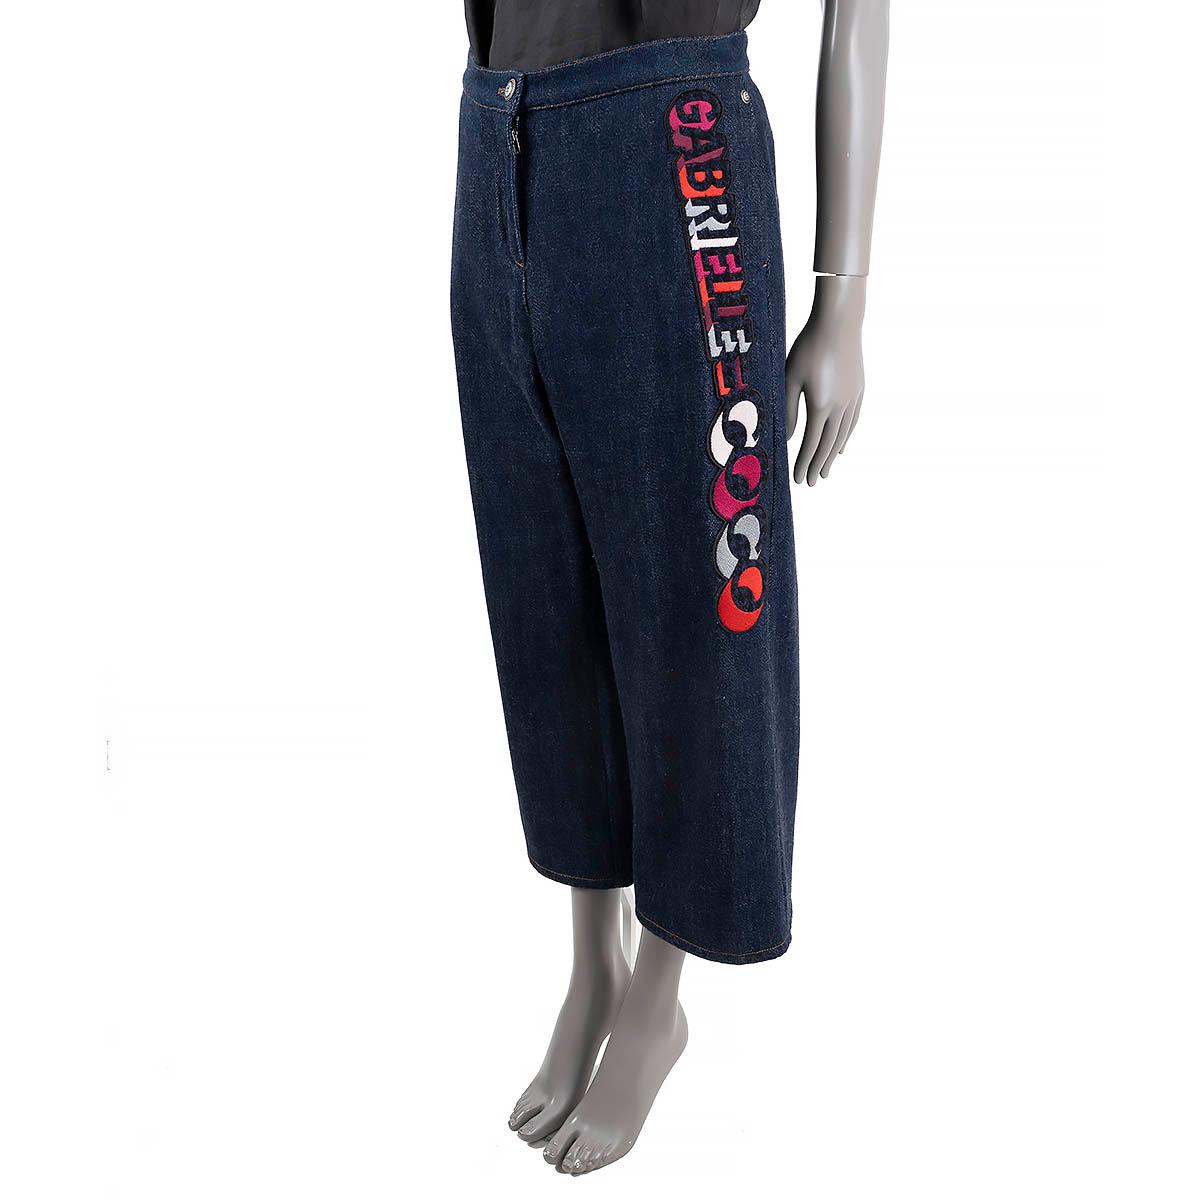 100% authentic Chanel jeans in blue denim cotton (100%) with a Gabrielle Coco appliqué in red, pink, blue, white and gray. Features slit pockets on the front. Open with a zipper and a CC logo button on the front. Has been worn and is in excellent